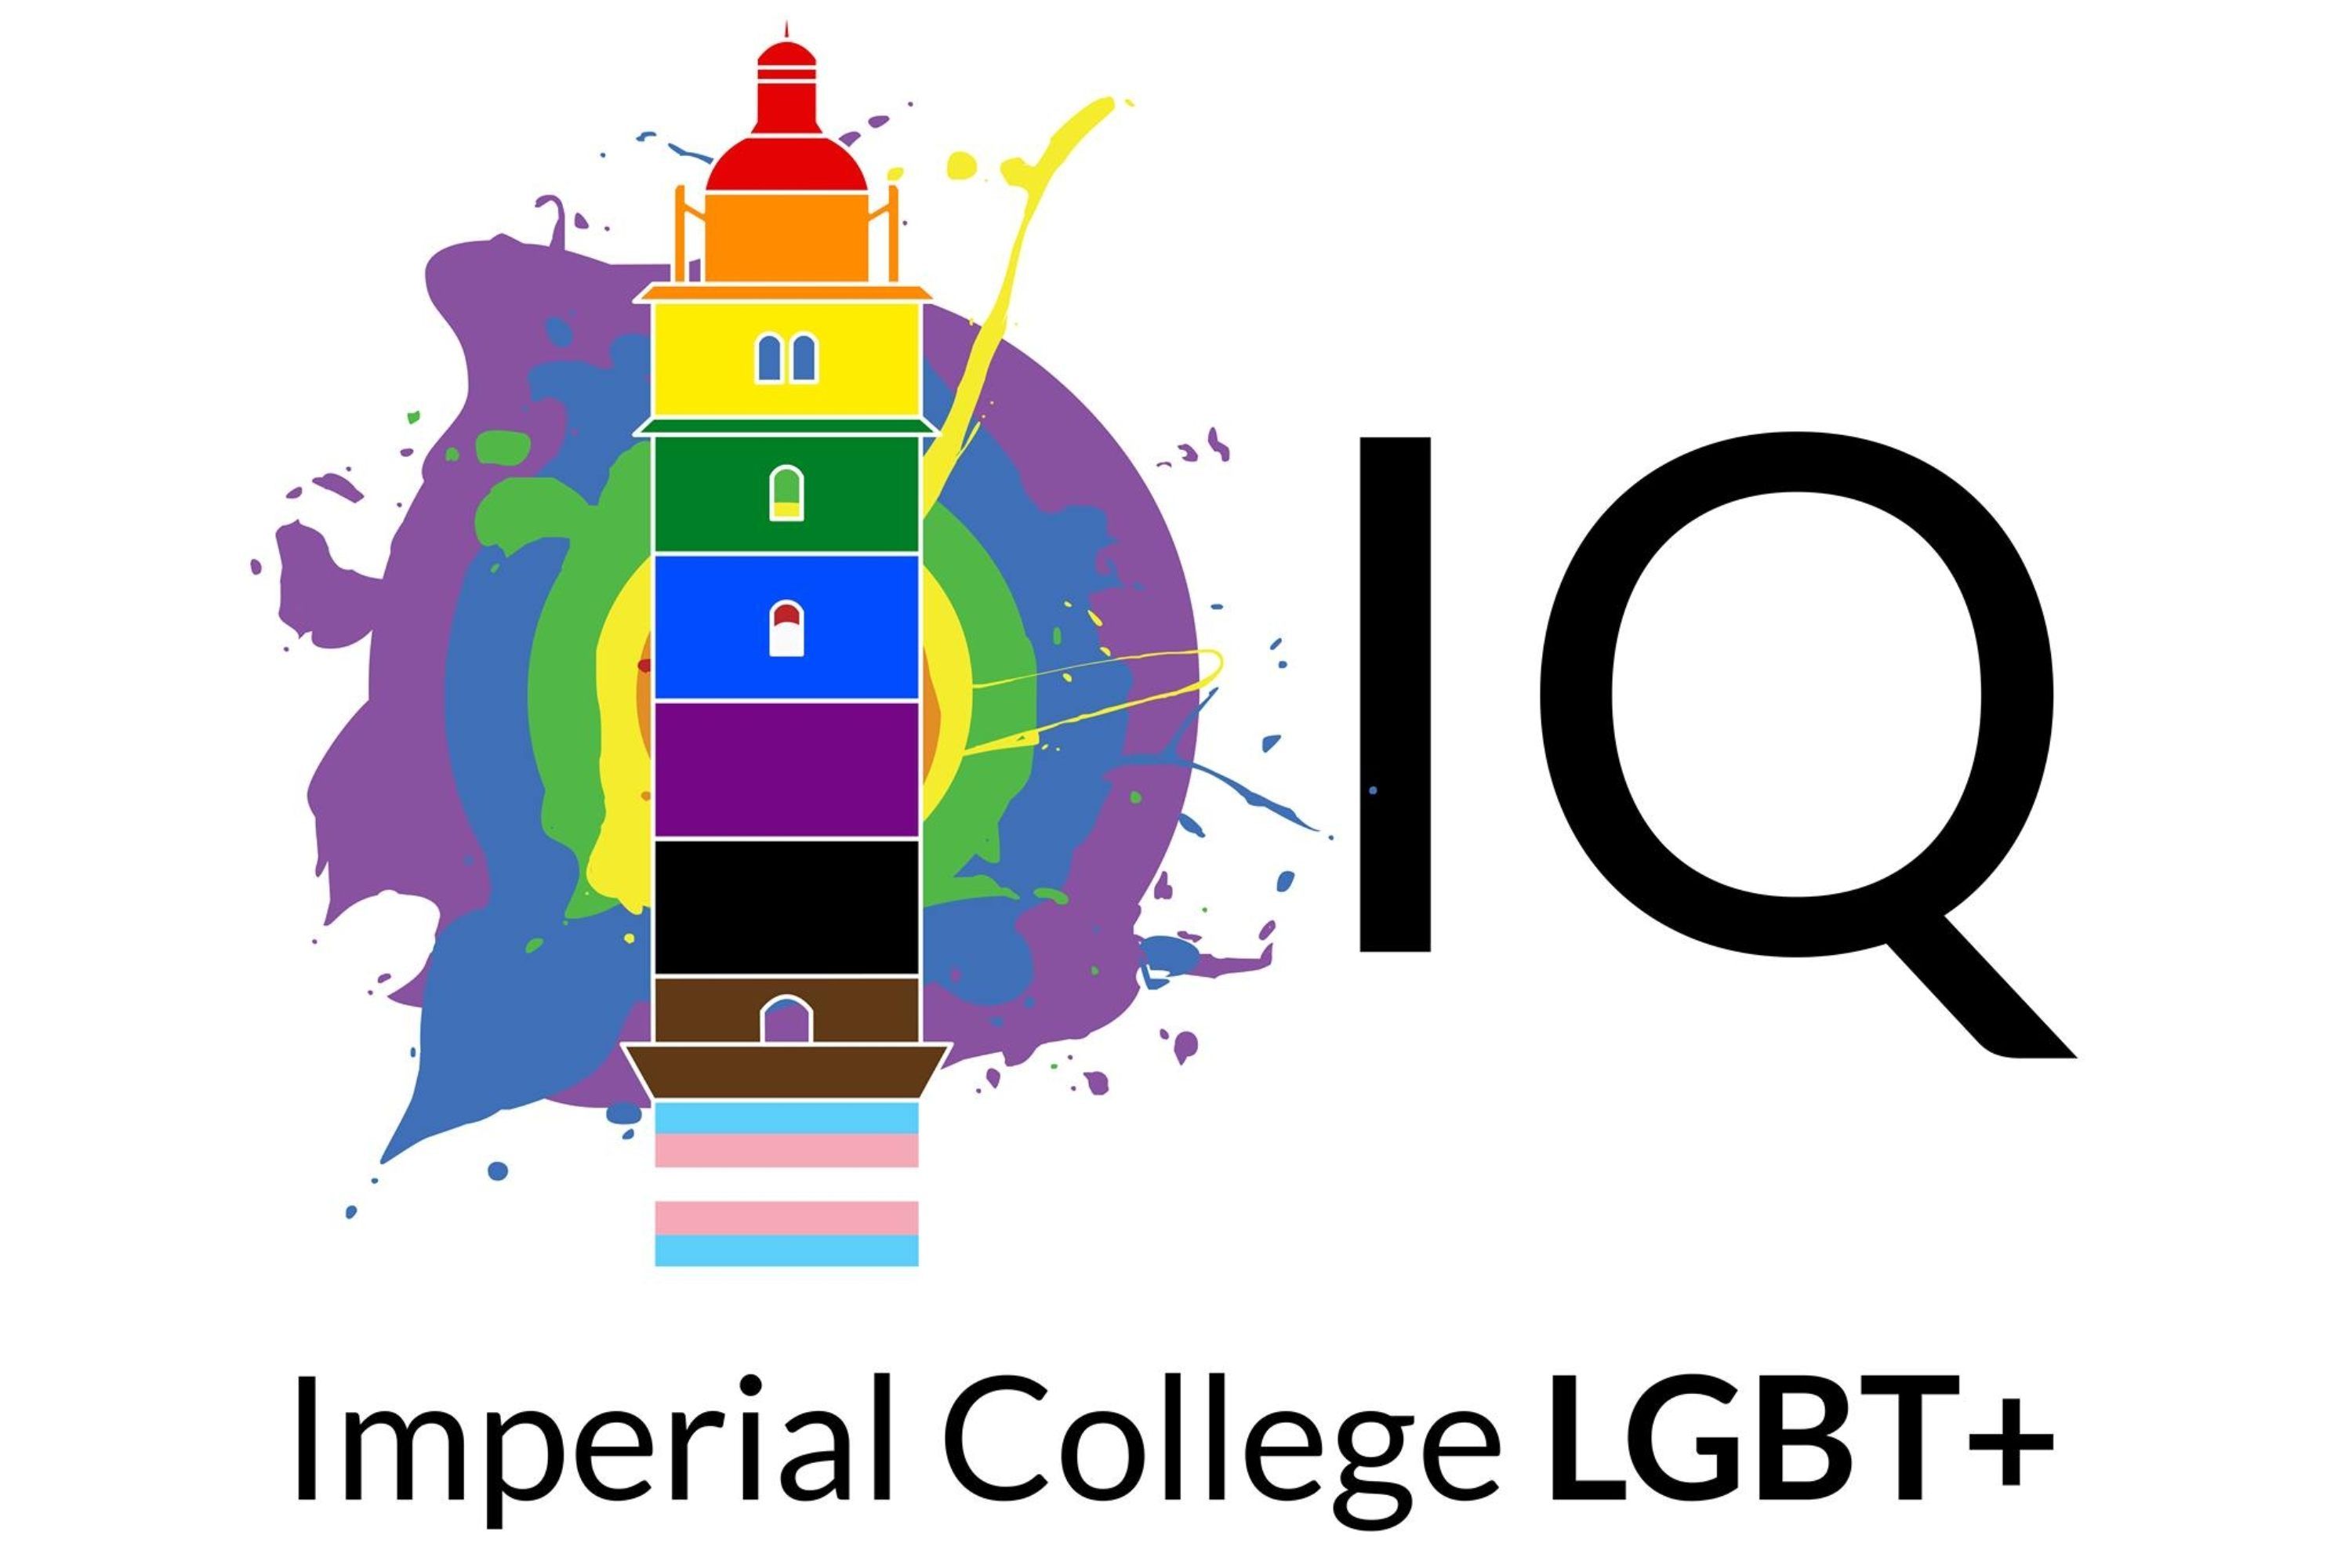 Rainbow colour Queen's Tower with text reading IQ Imperial College LGBT+